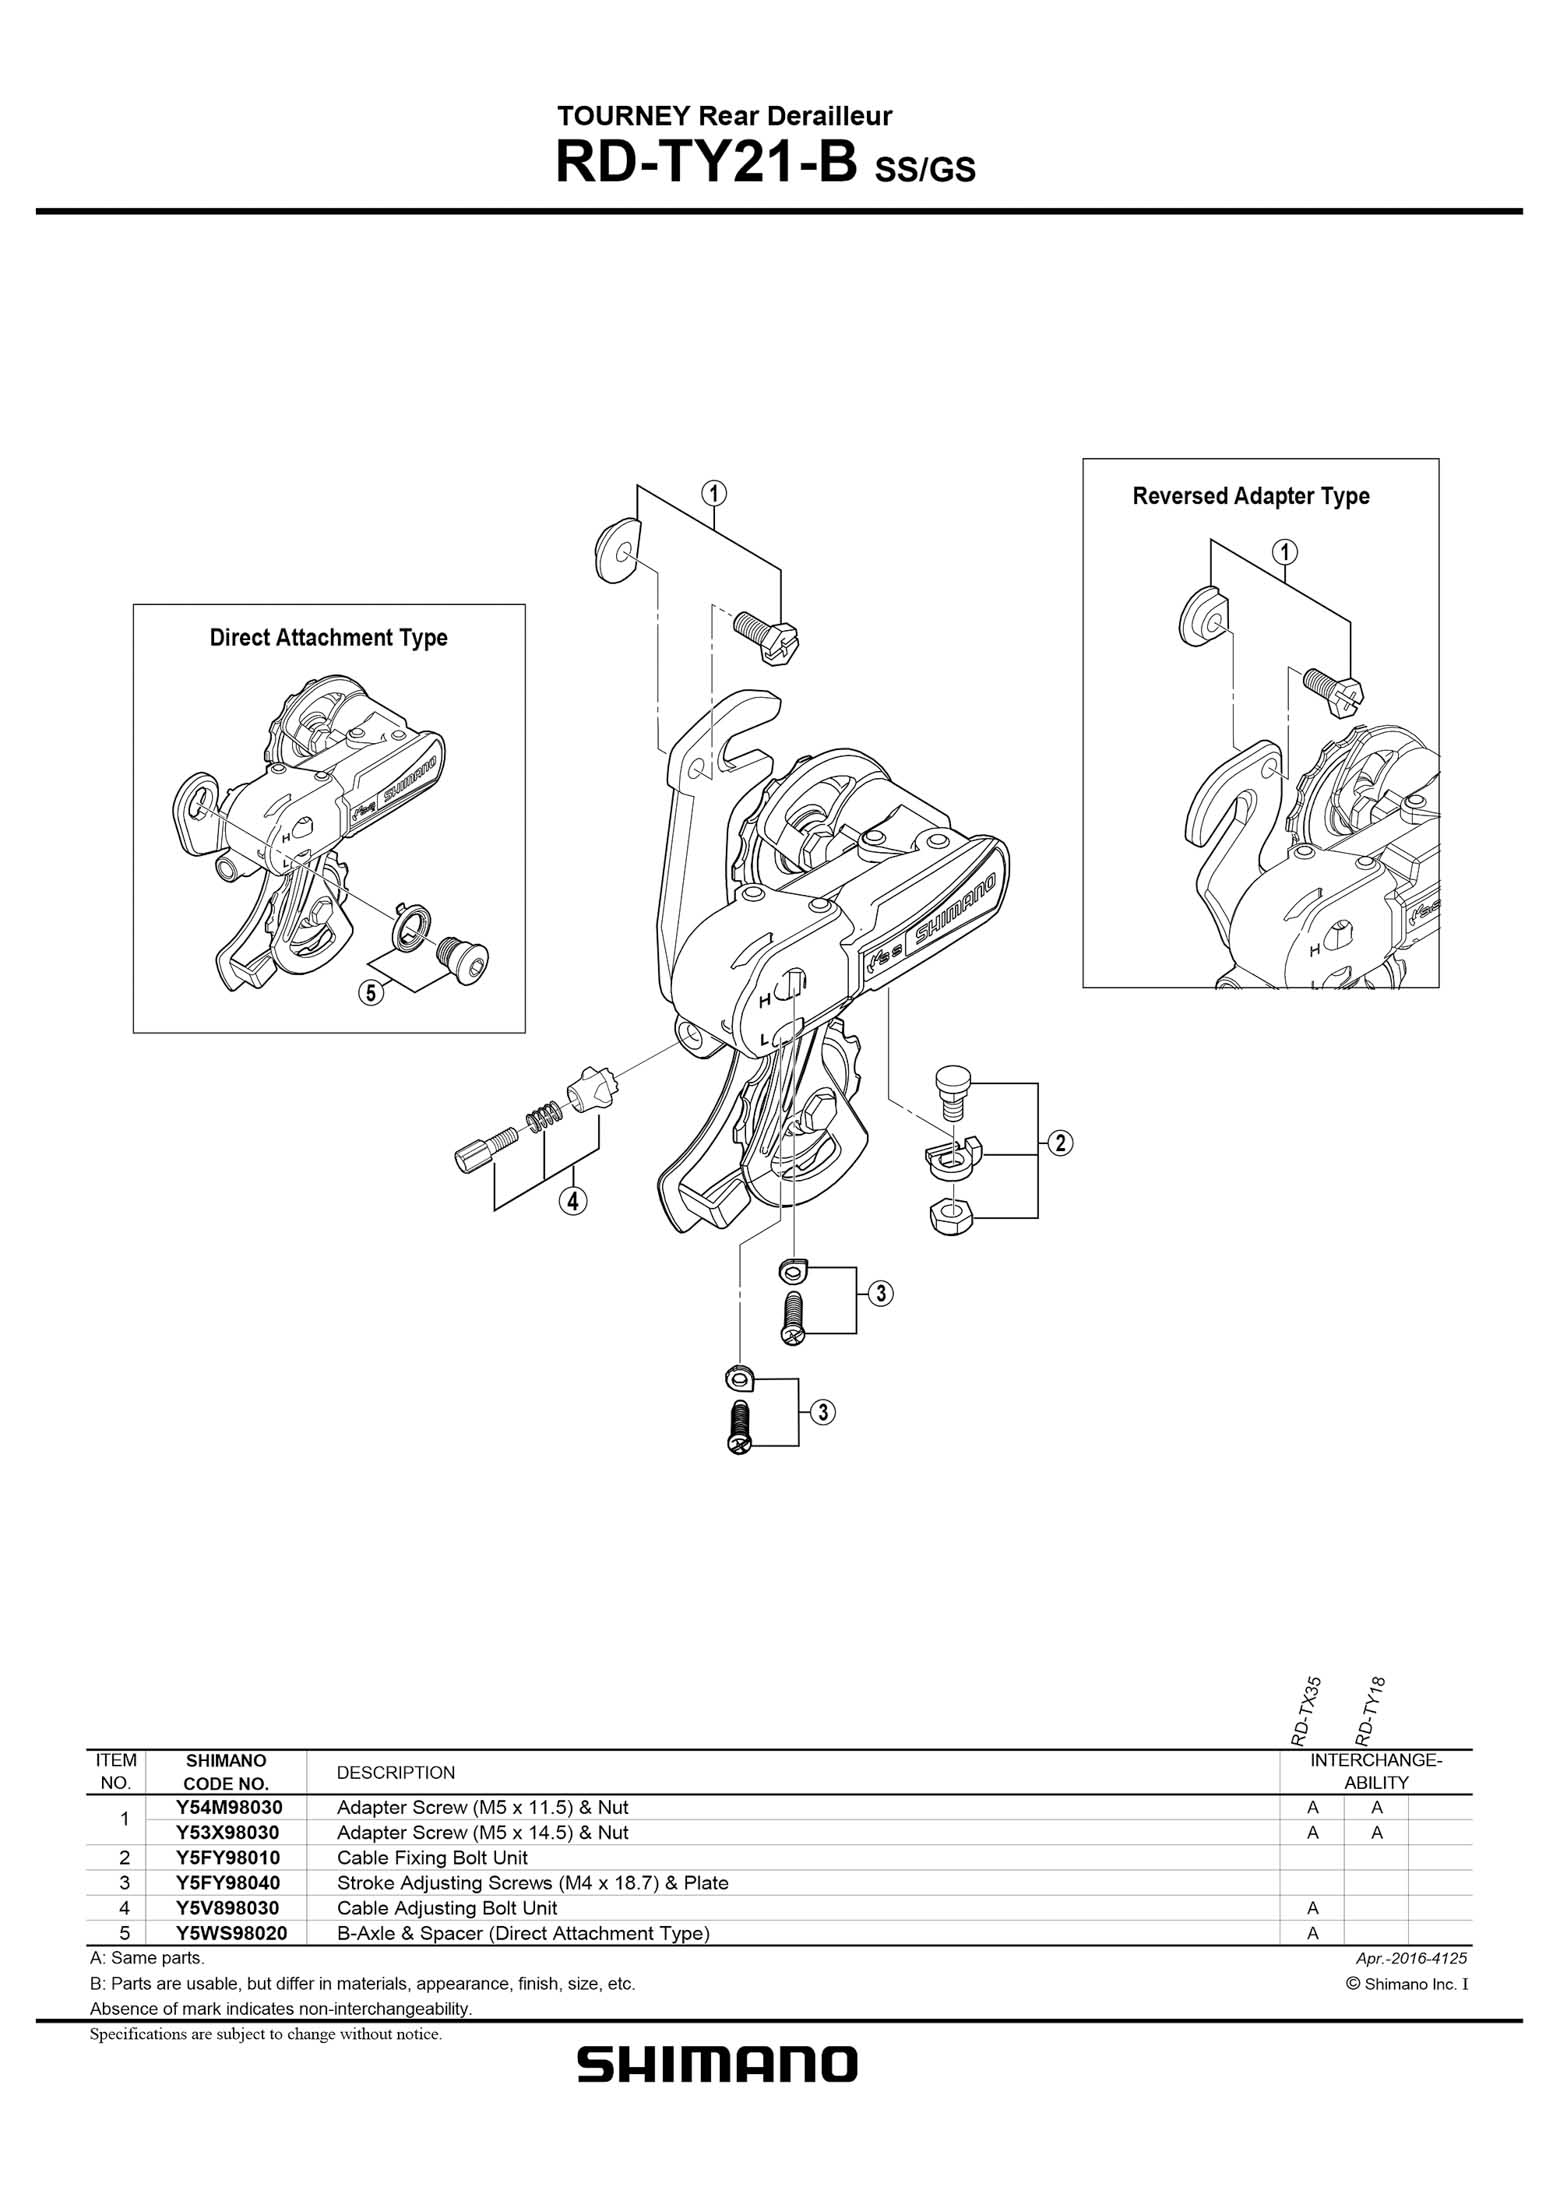 Shimano web site 2020 - exploded views from 2016 Tourney (TX21-B series) main image